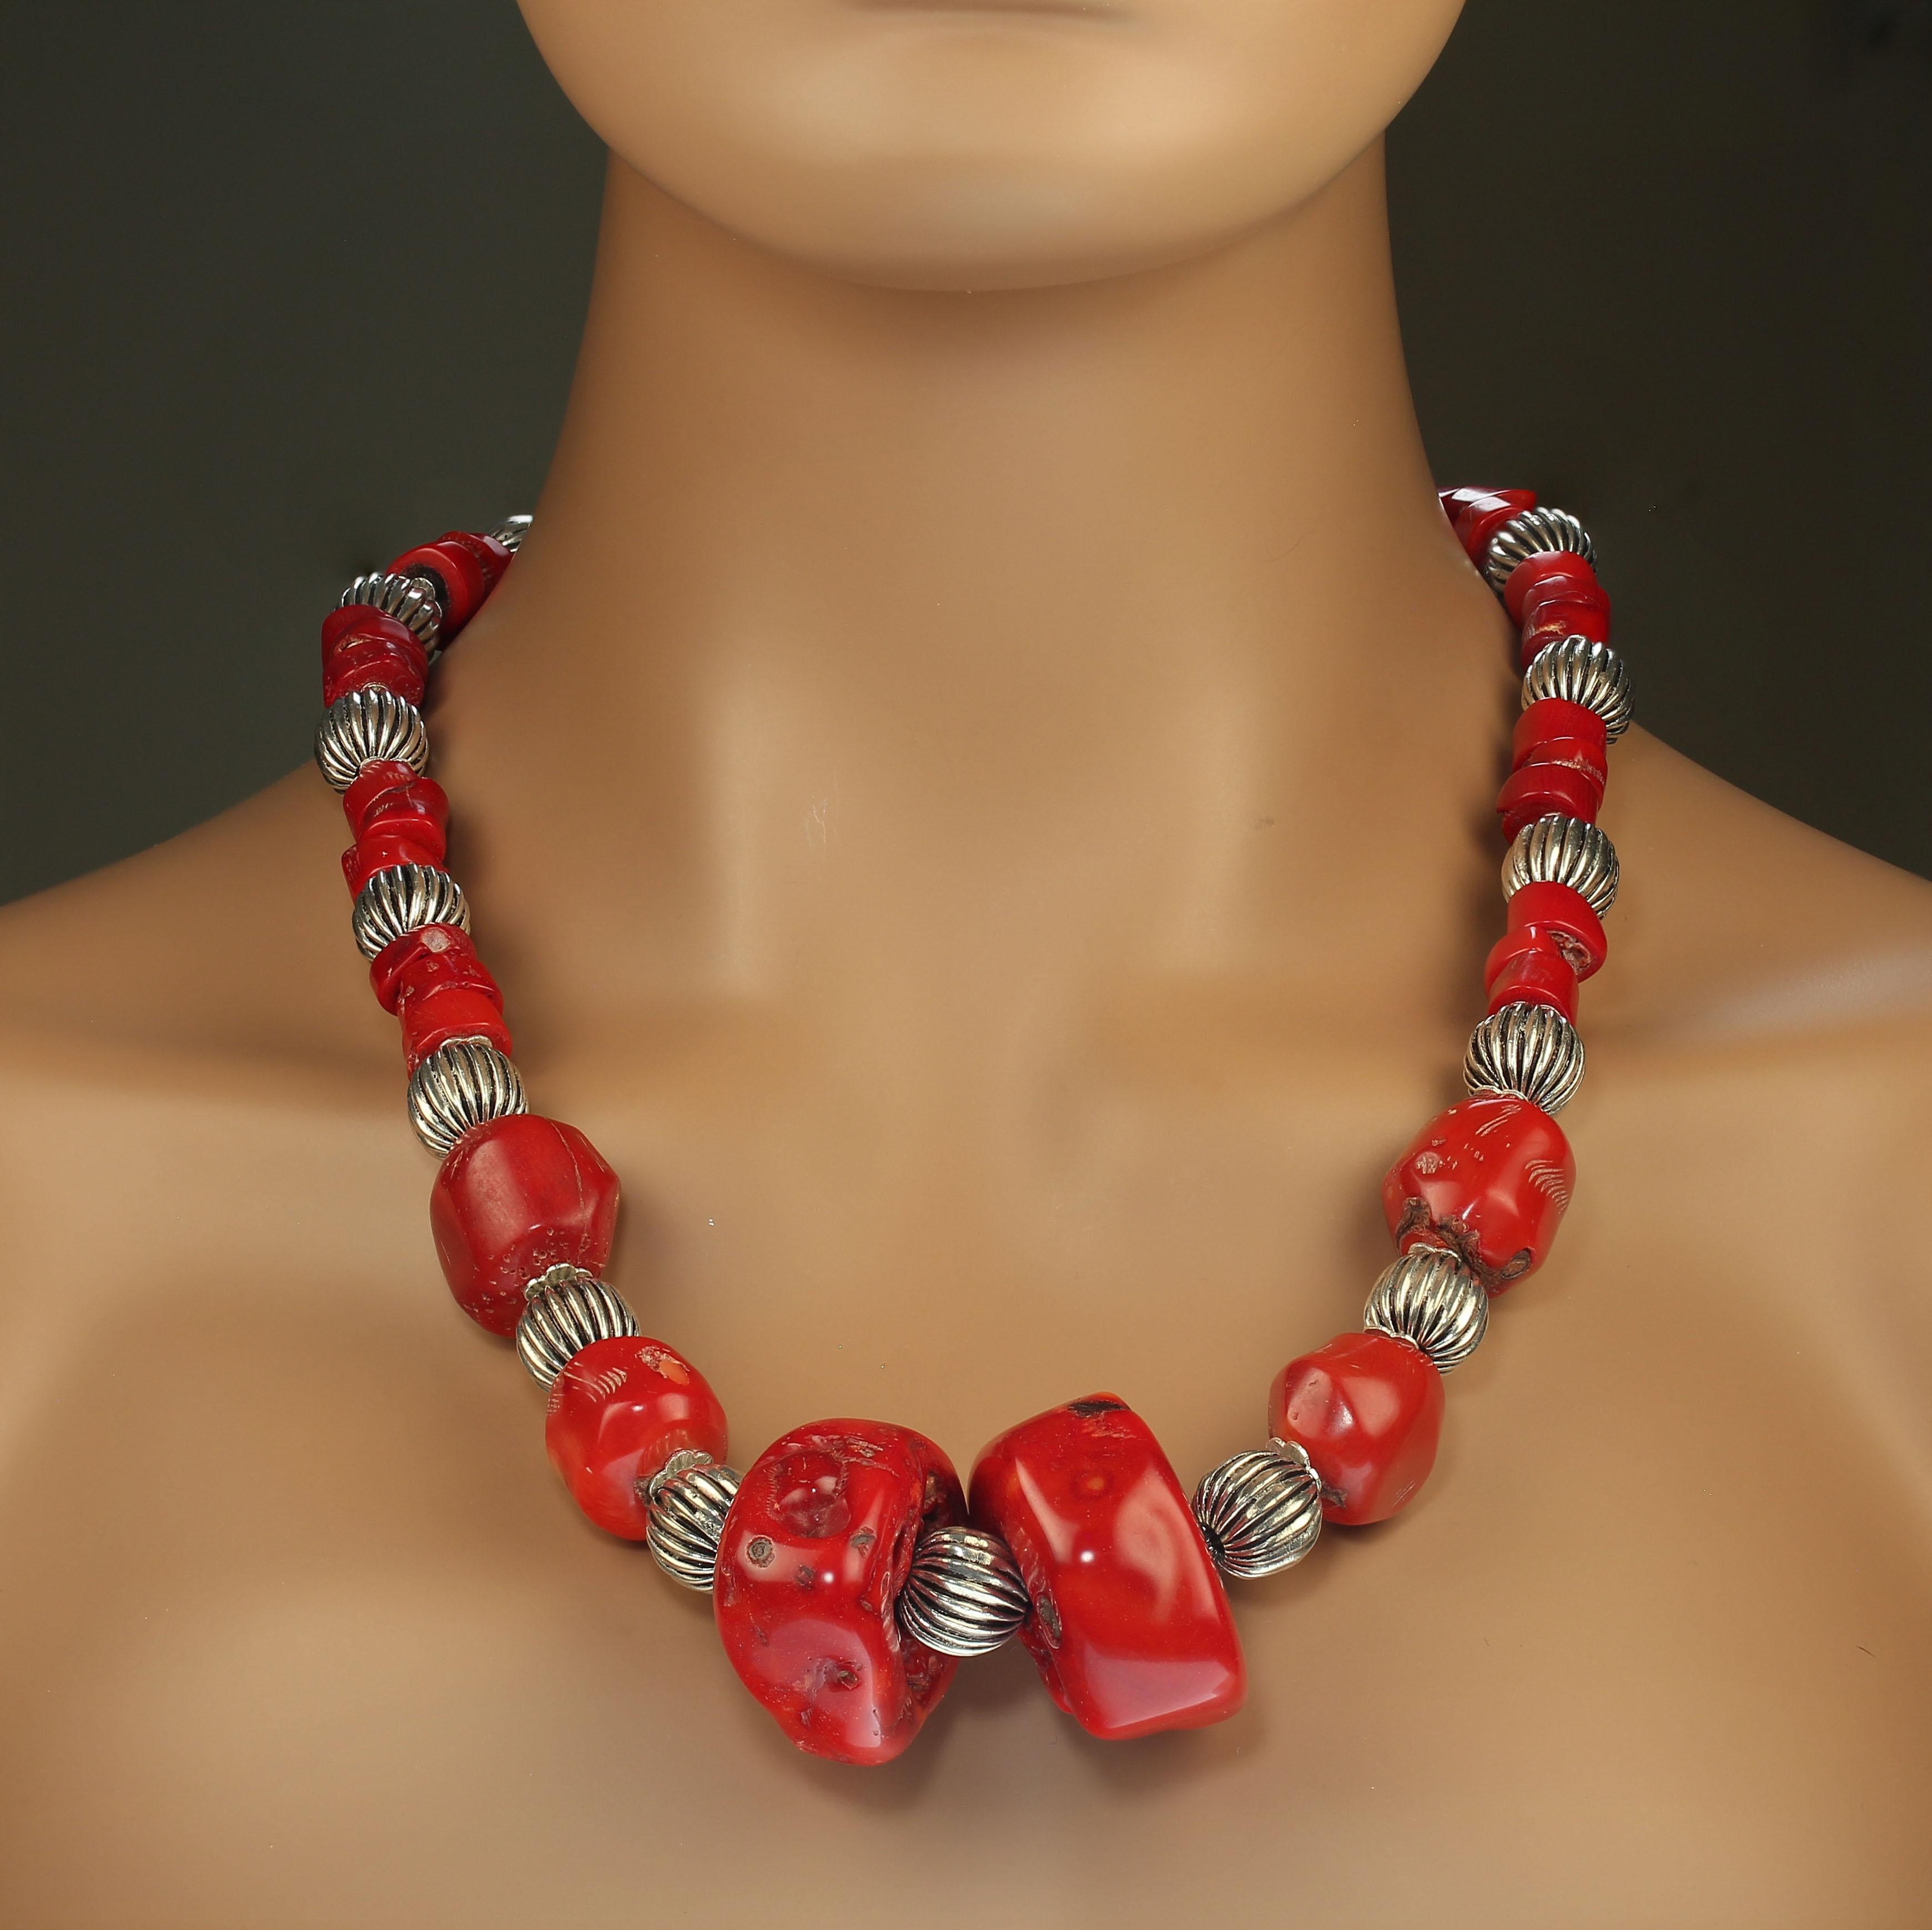 24 Inches of gorgeous red bamboo coral starting with two fantastic focals and fluted silver tone accents throughout the necklace.  This unique necklace is secured with a detailed silver toggle.  MN2454